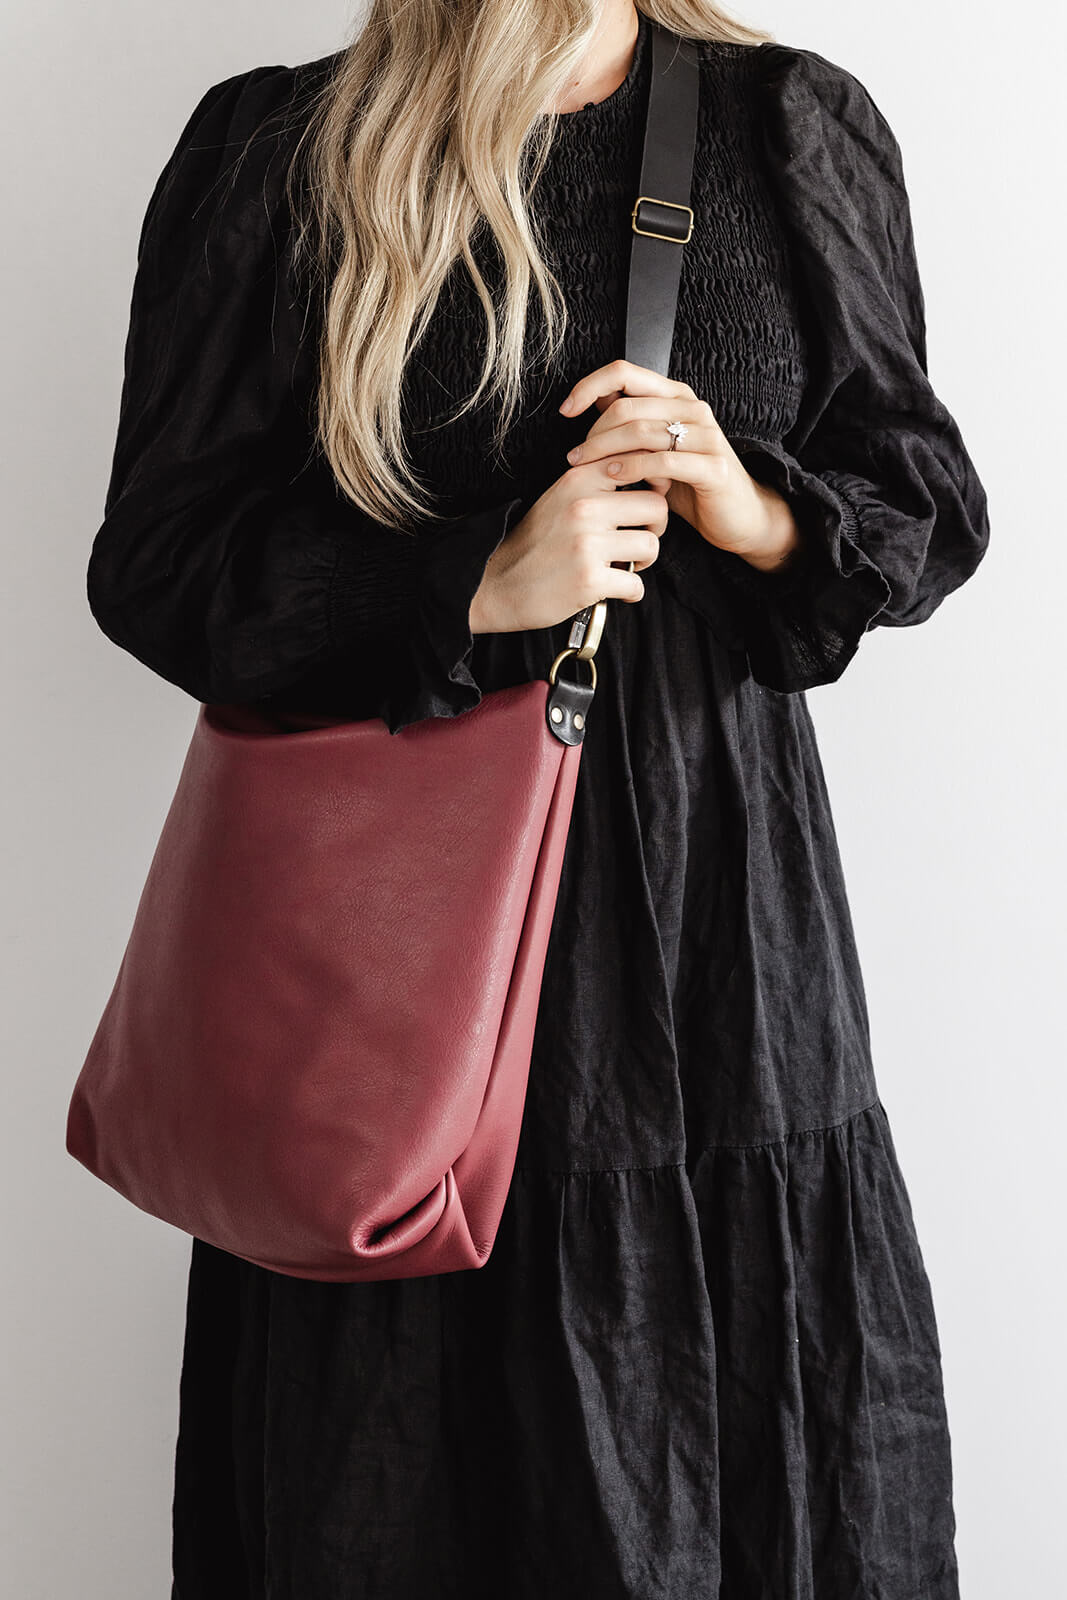 Product shot of the Cherry Leather Carryall by Ella Jackson. The bag is being worn by a woman in a long black dress against a white background